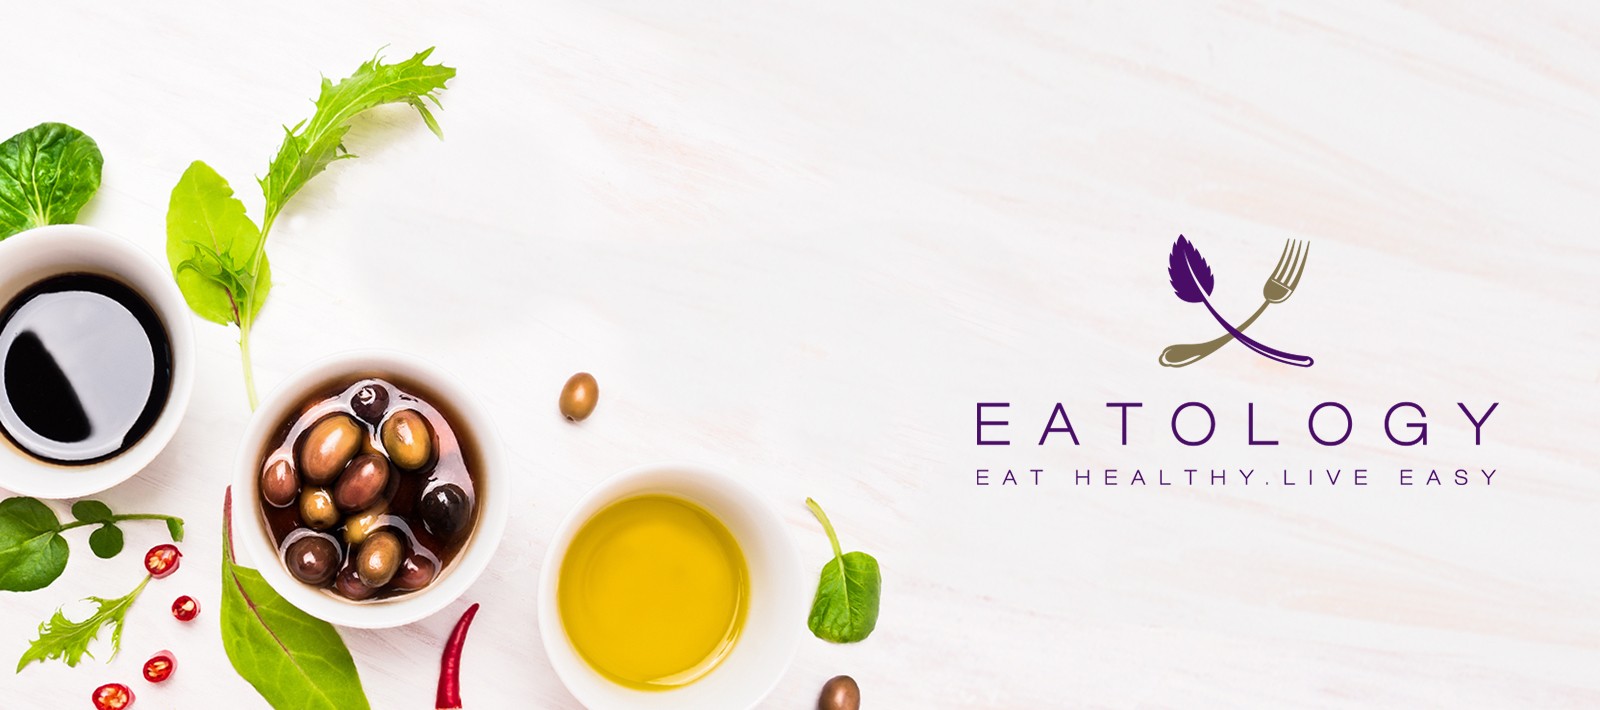 Brand creation services for Eatology